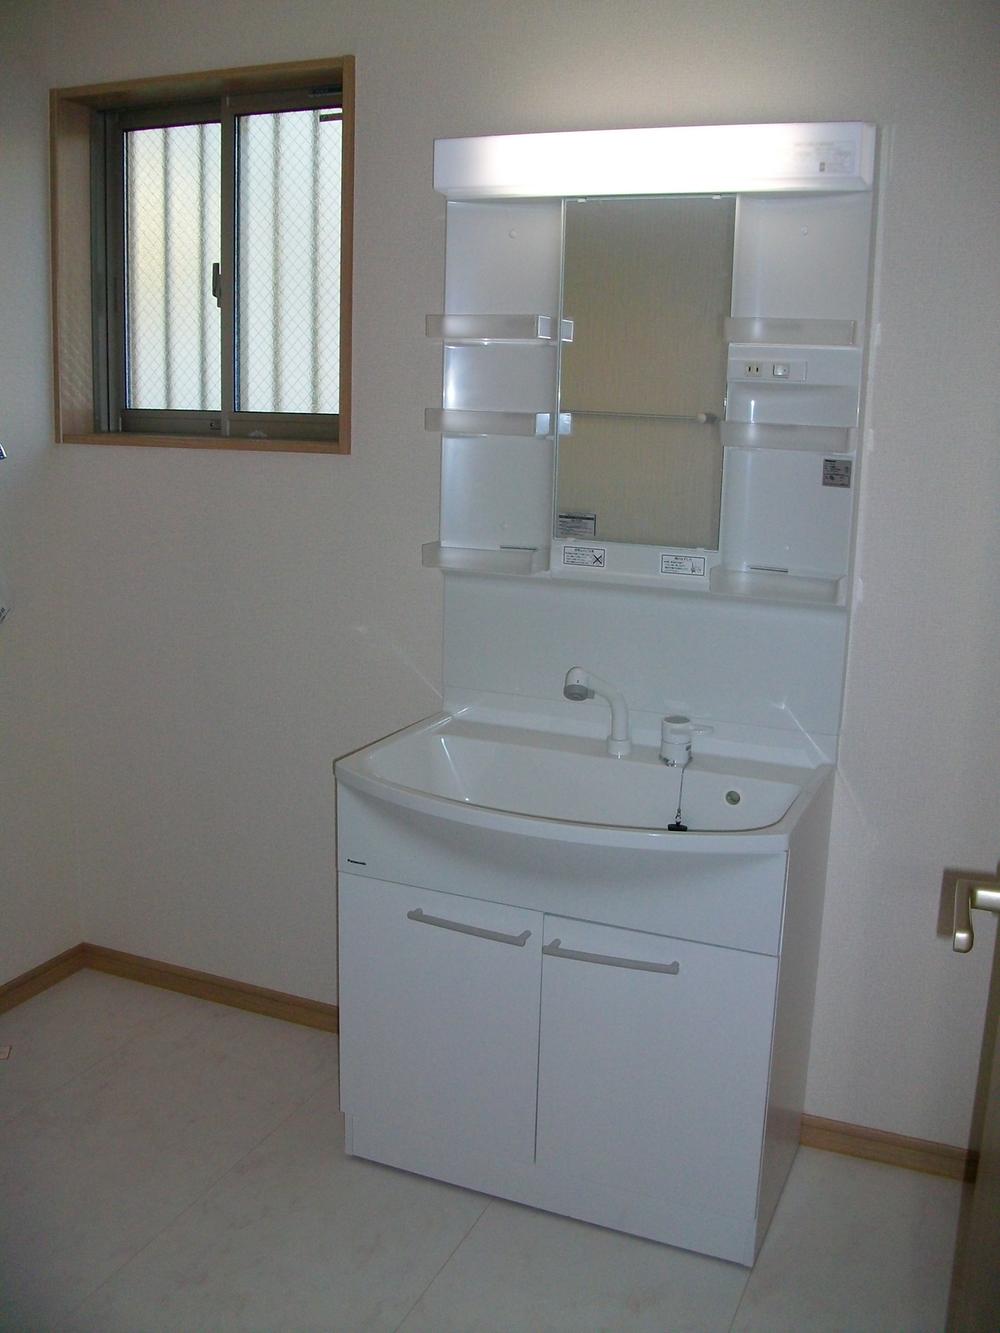 Wash basin, toilet. All building 1 pyeong type washroom and dresser